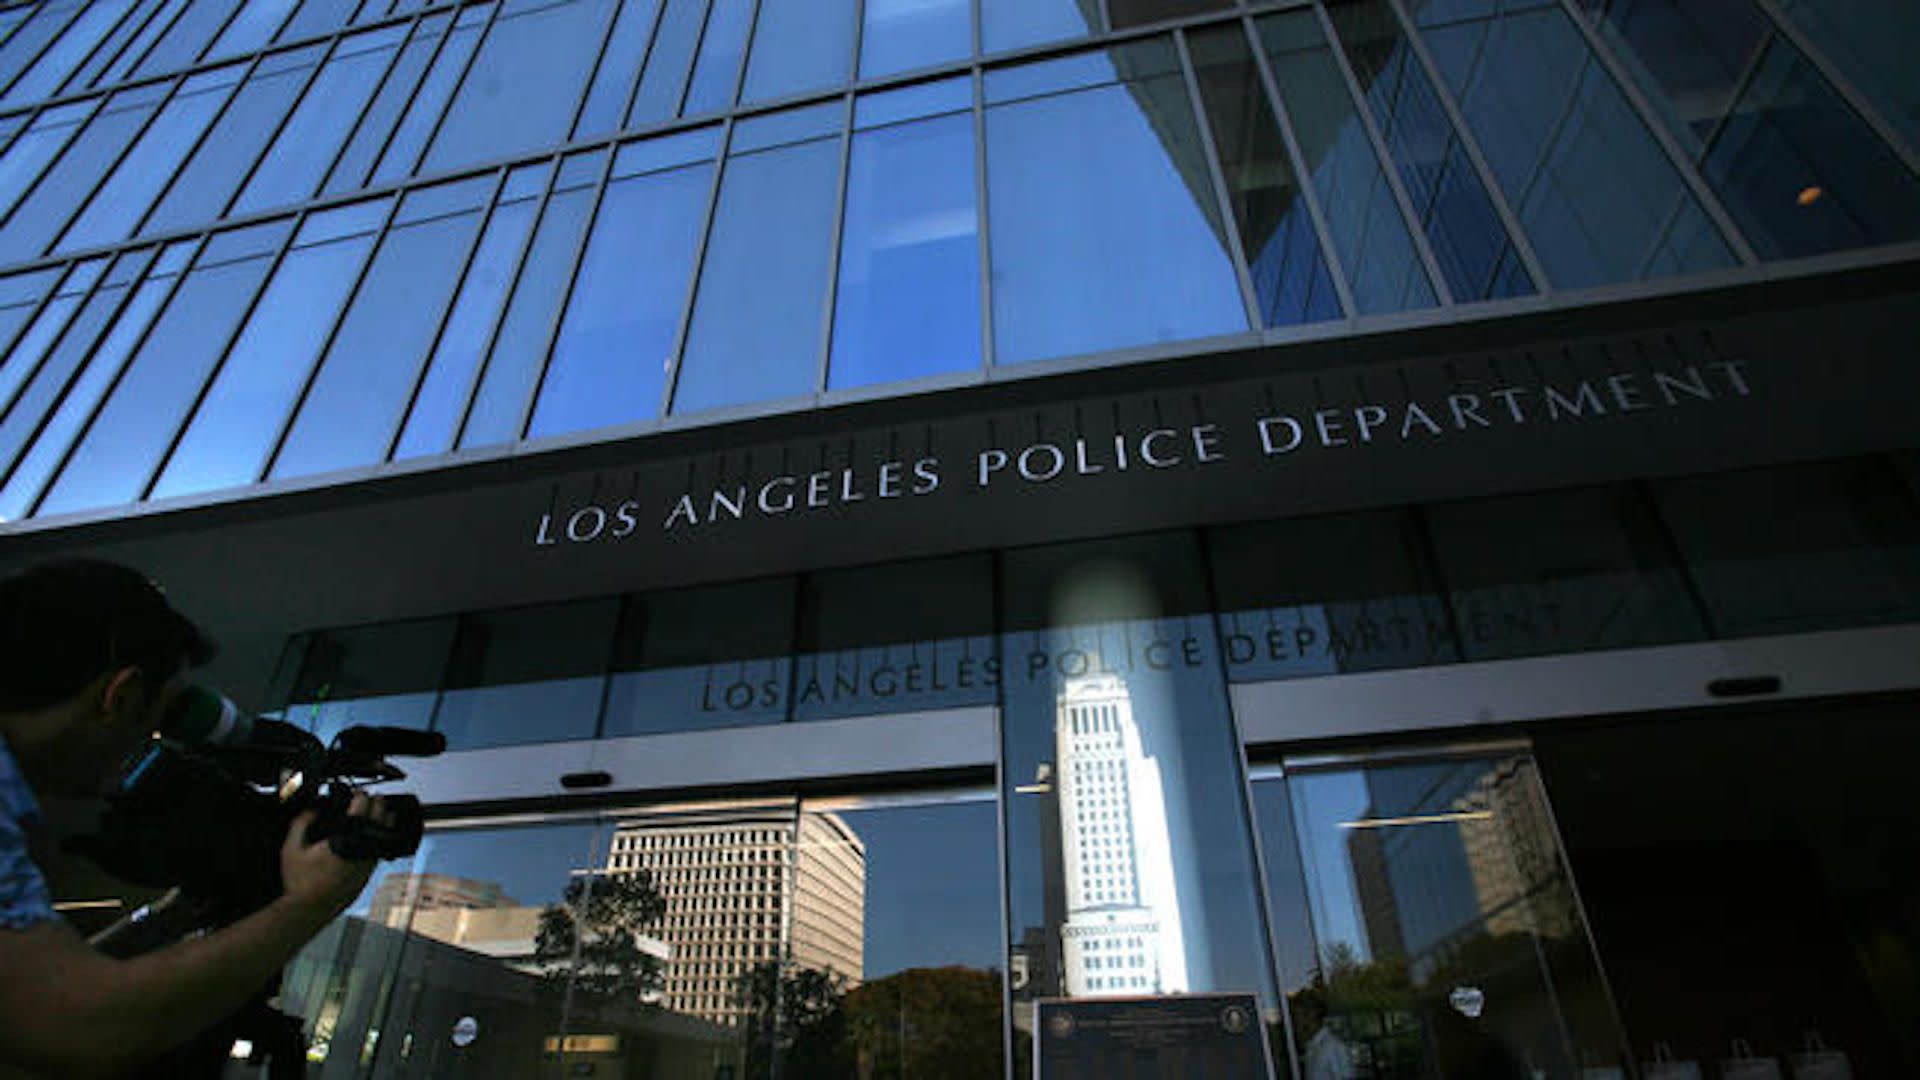 Lapd Officer Charged With Raping 2 Victims Was Linked To Earlier 